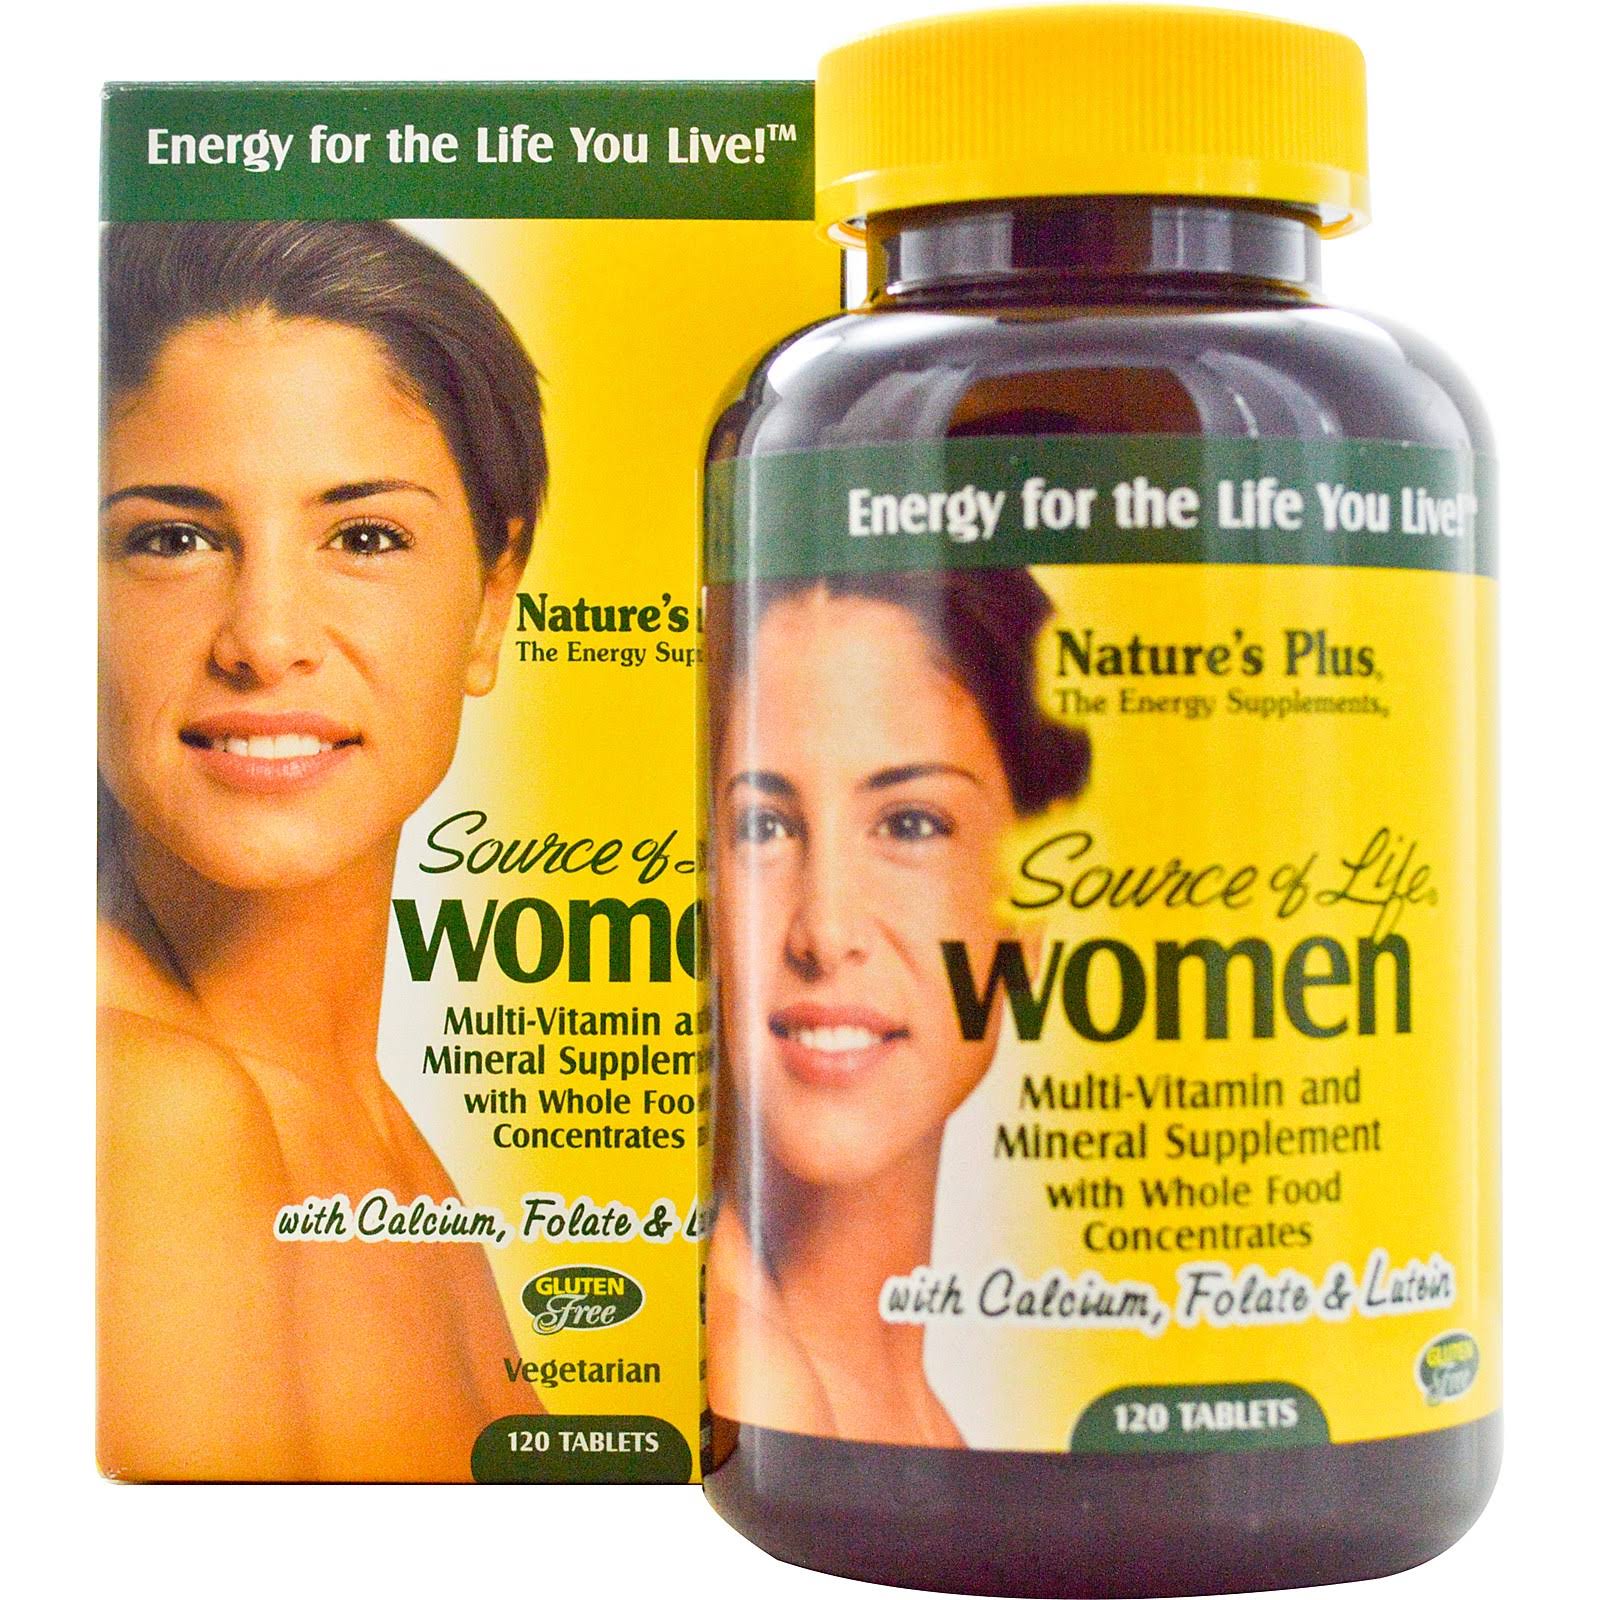 Nature's Plus Source of Life Women Multi-Vitamin and Mineral Supplement Tablets - x120